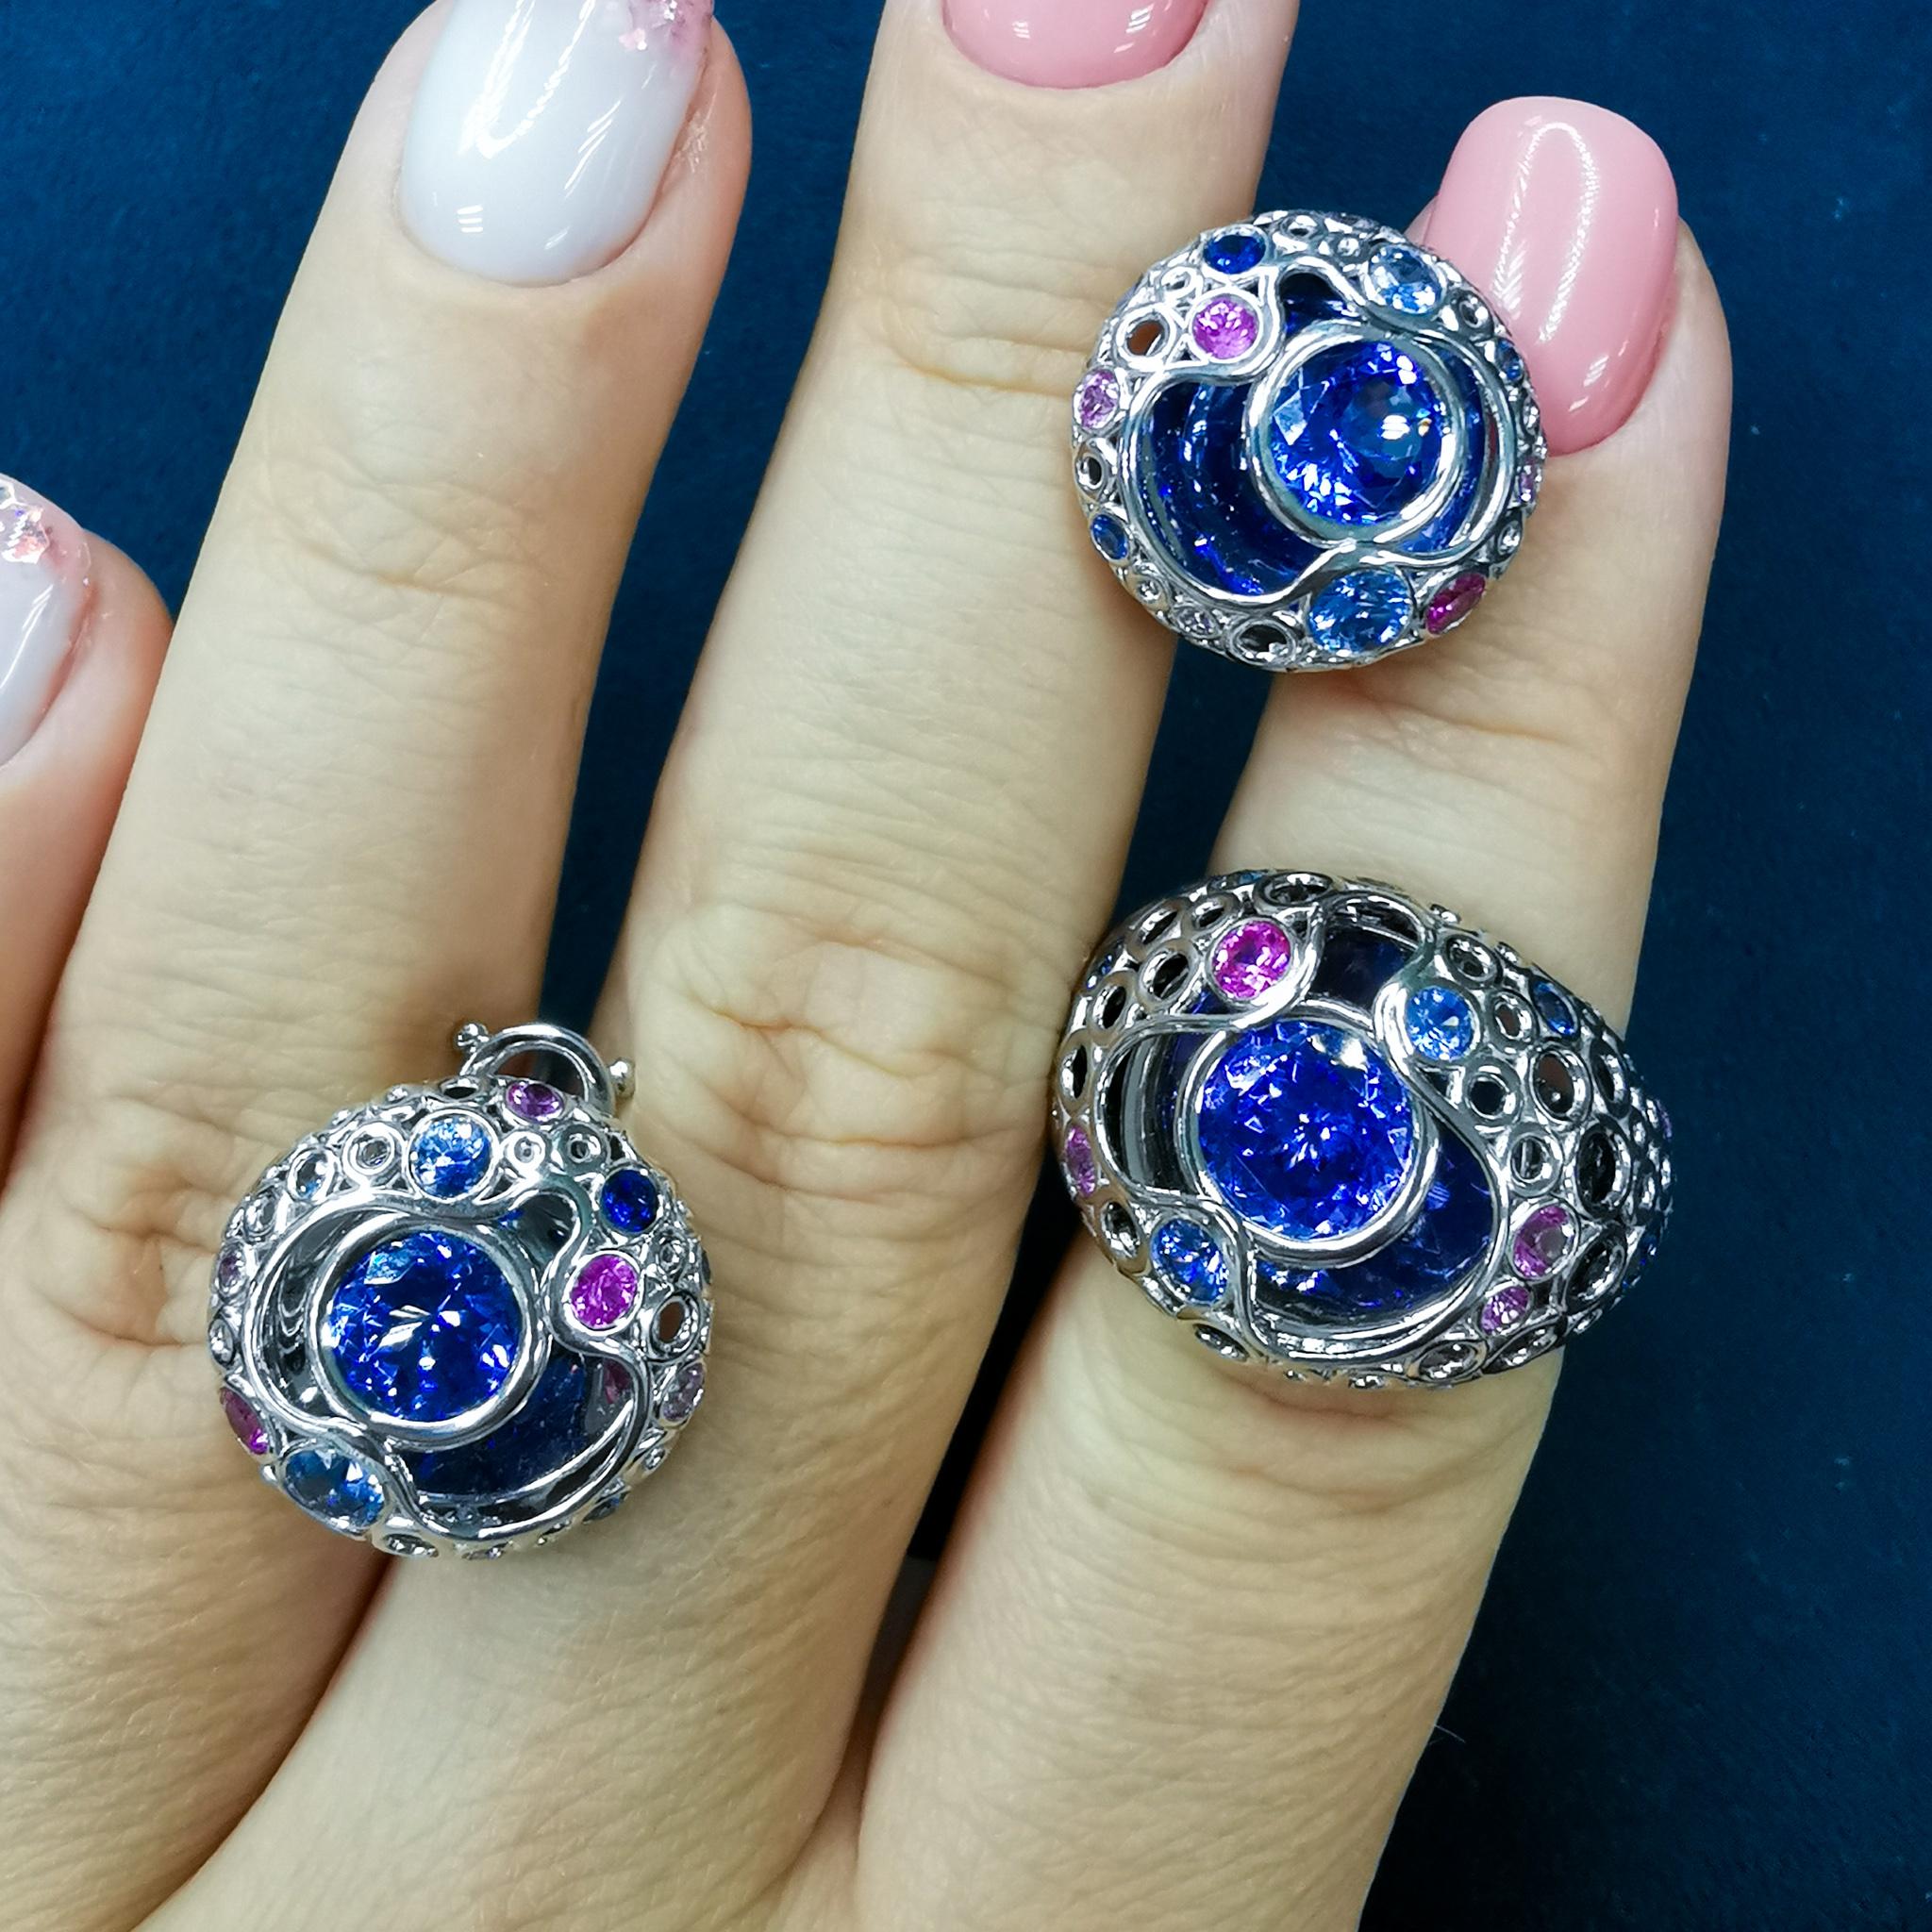 Tanzanites Pink Blue Sapphires 18 Karat White Gold Bubble Suite
Incredibly light and airy Suite from our Bubbles Collection. White 18 Karat Gold is made in the form of variety of small bubbles, some of which have Pink and Blue Sapphires setted. The